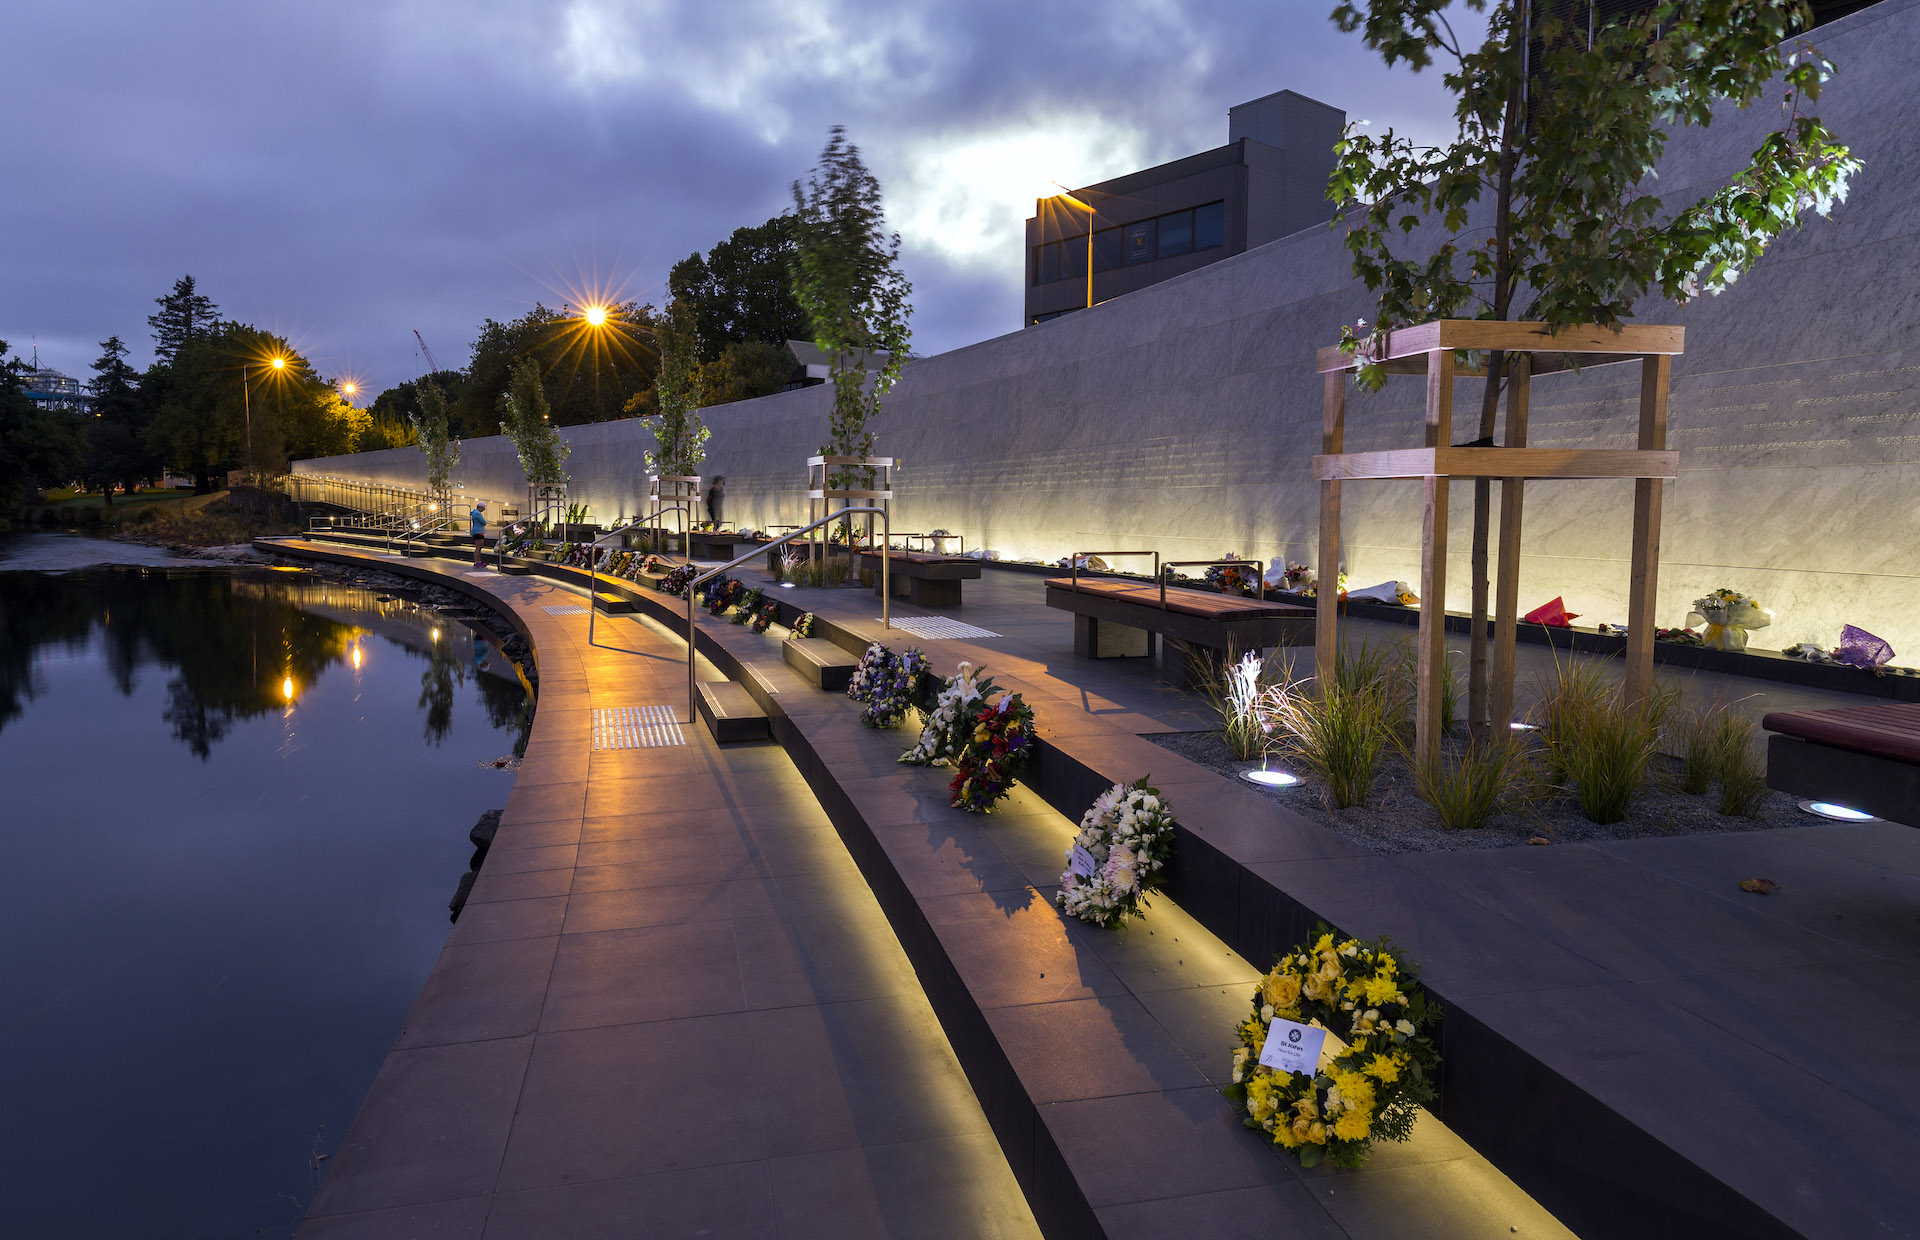 Commemoration night at earthquake memorial wall illuminated by ibex lighting.